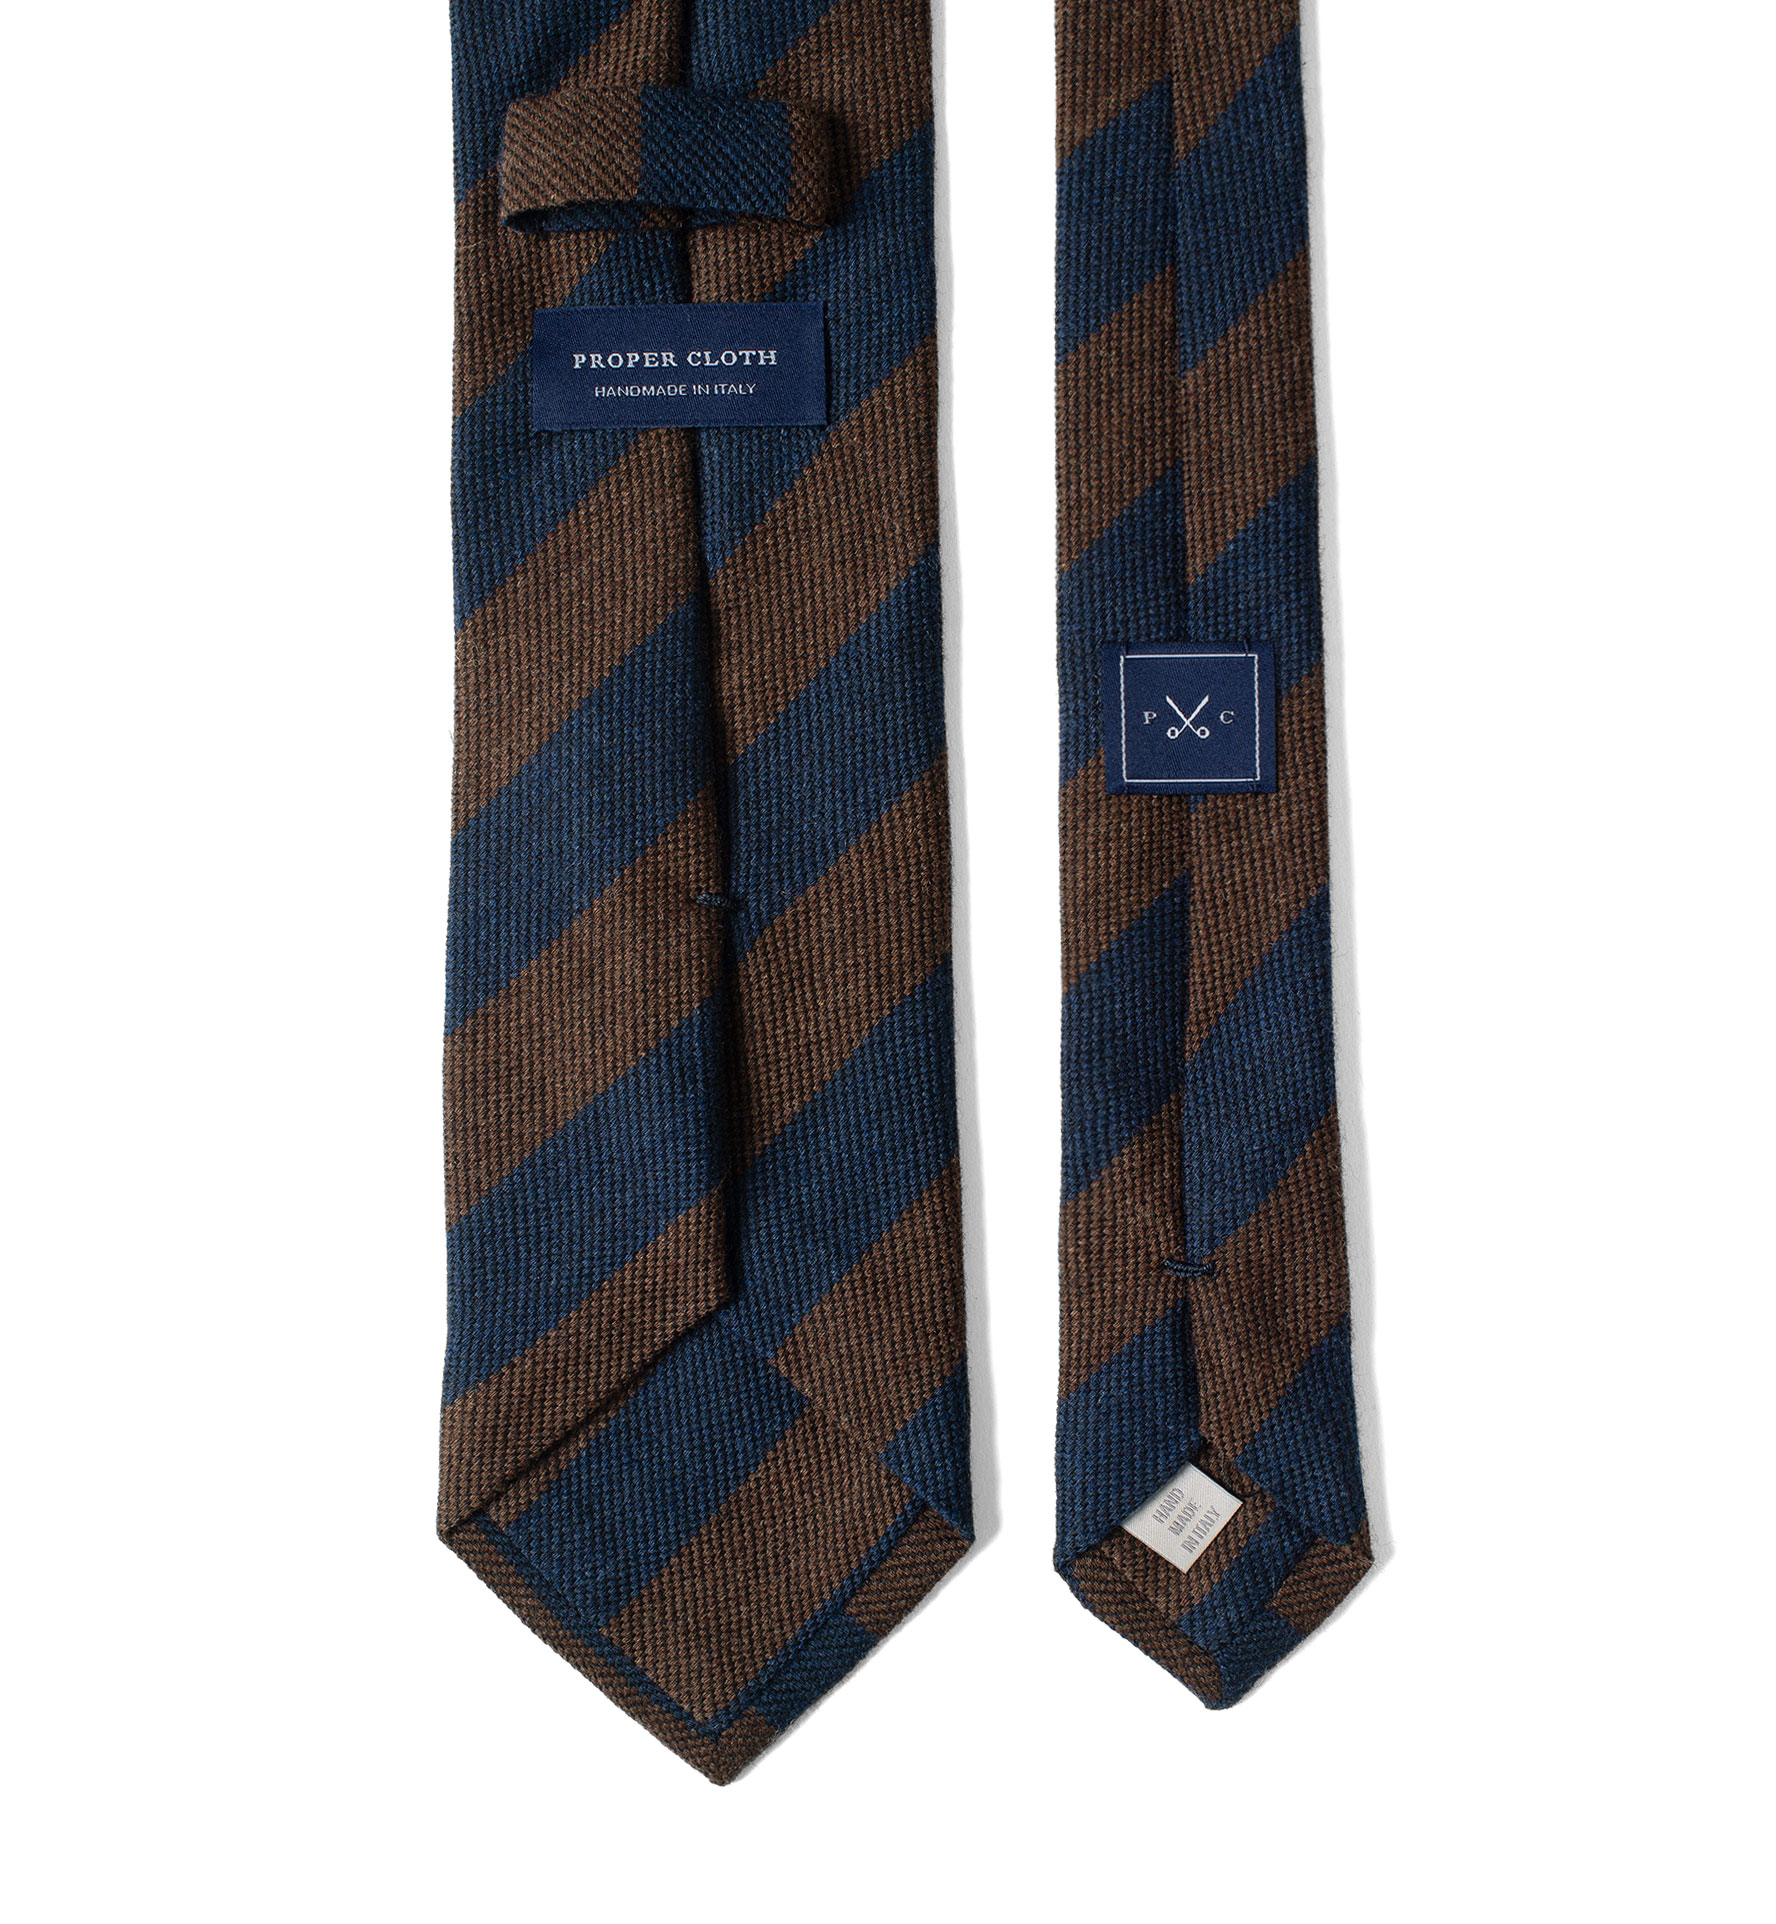 Chestnut and Navy Striped Wool Tie by Proper Cloth